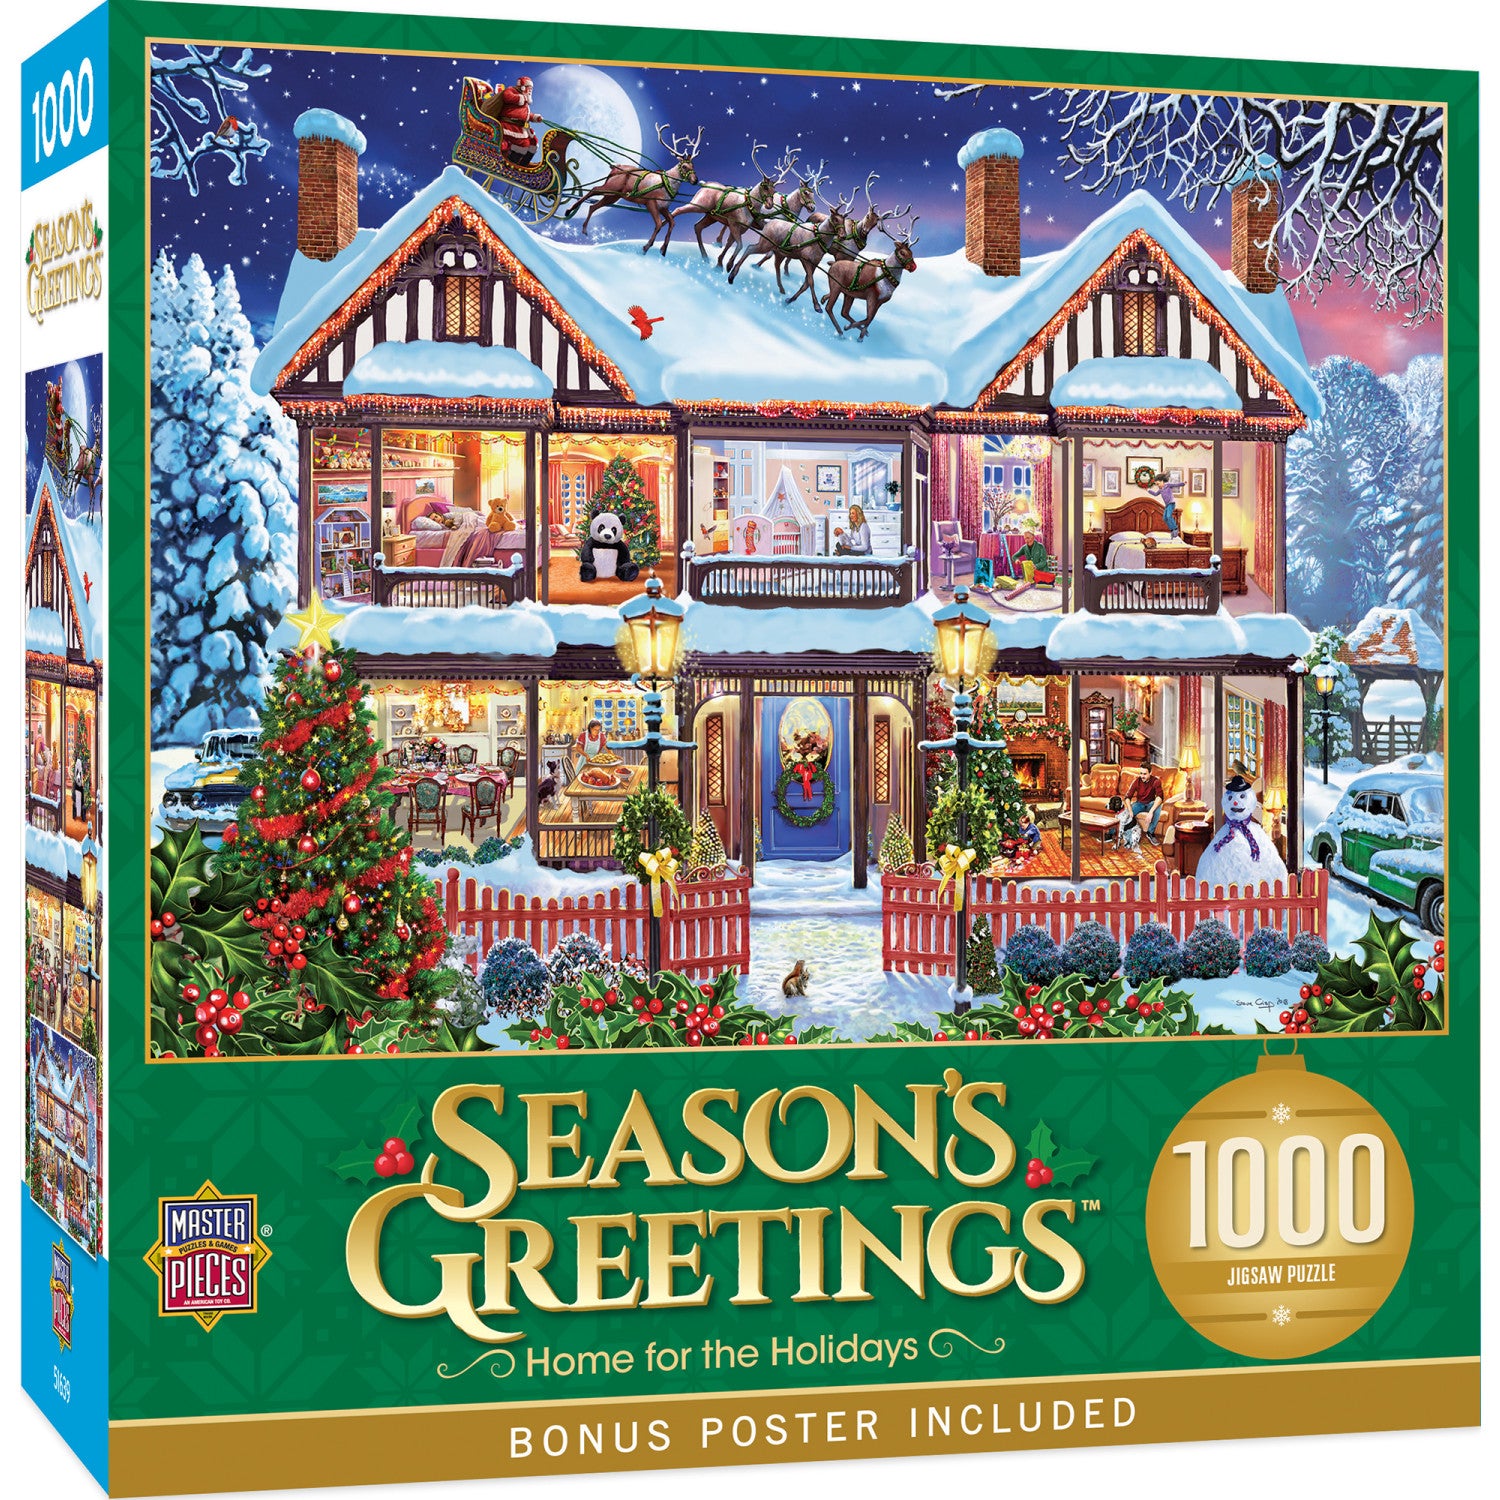 Season's Greetings - Home for the Holidays 1000 Piece Jigsaw Puzzle